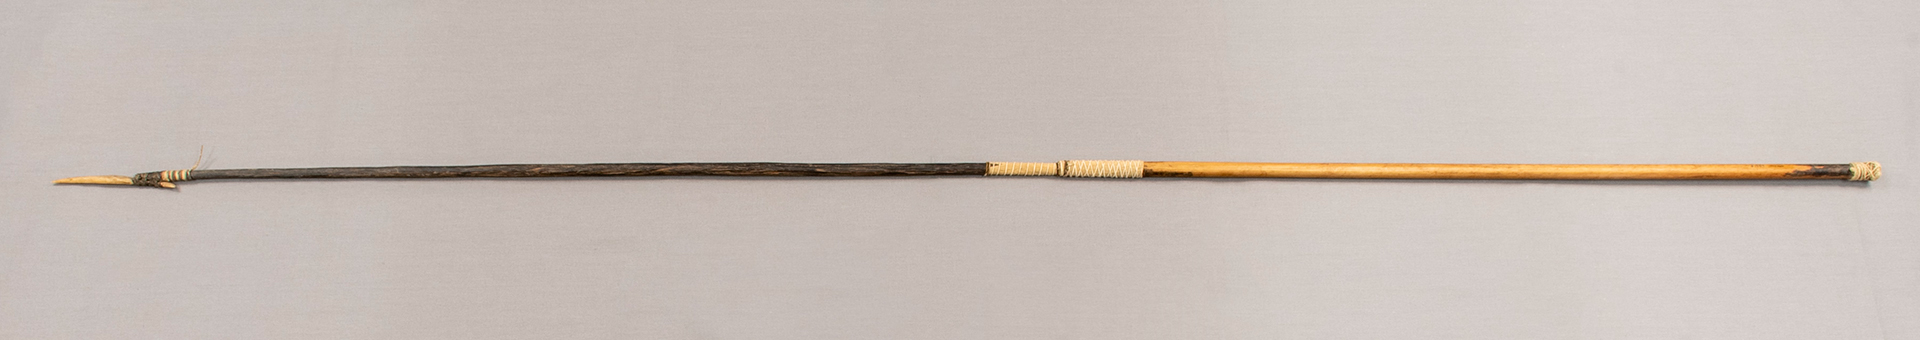 dark brown wooden arrow with a tip made from a sharpened piece of bone